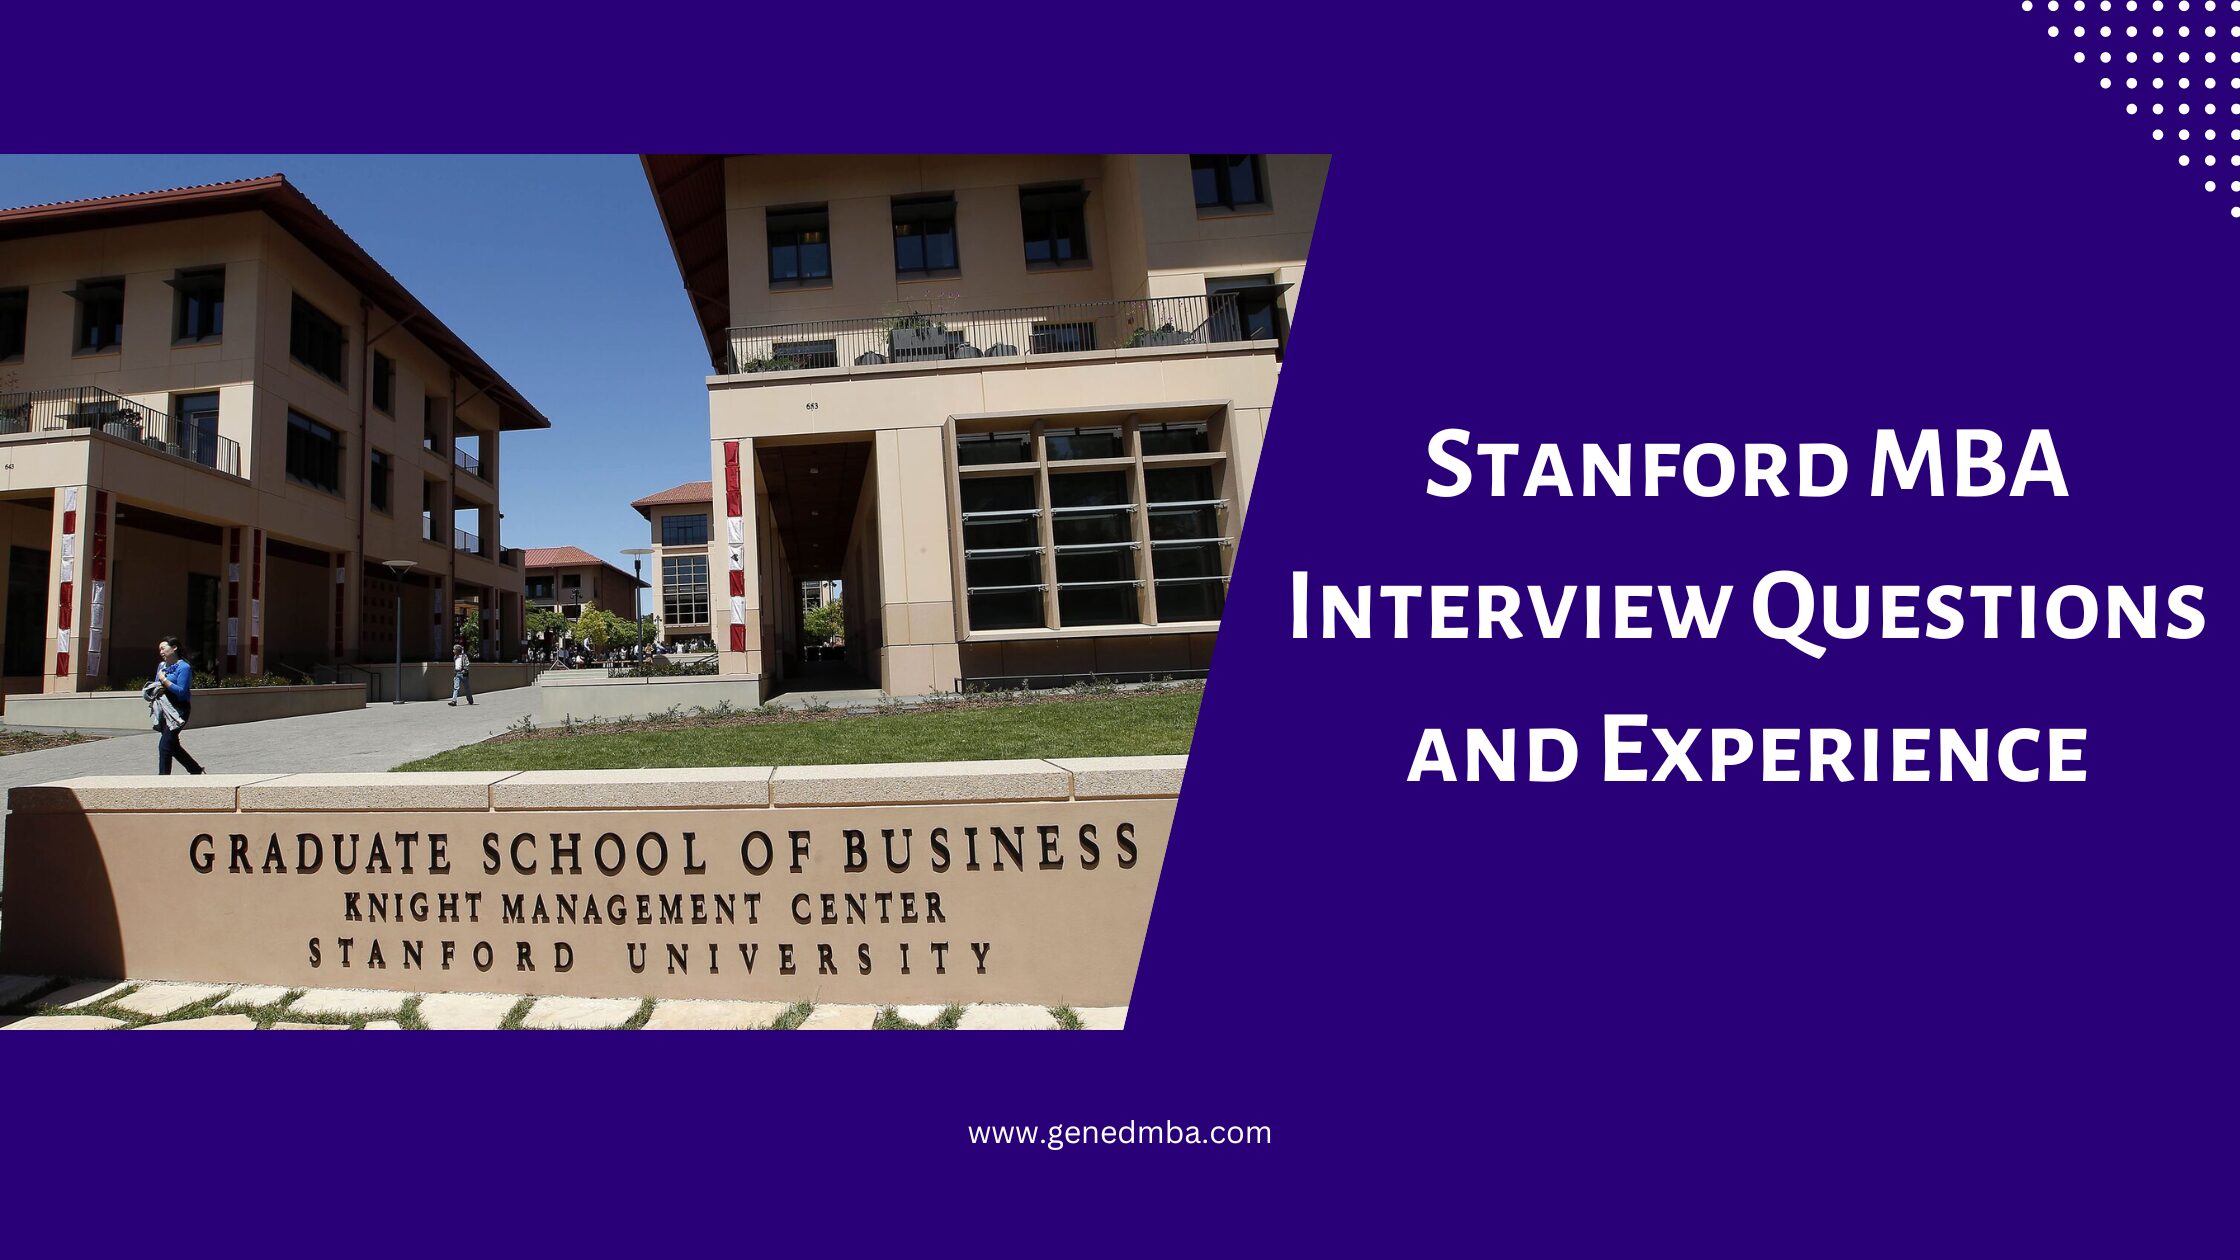 Stanford MBA Interview Questions and Experience